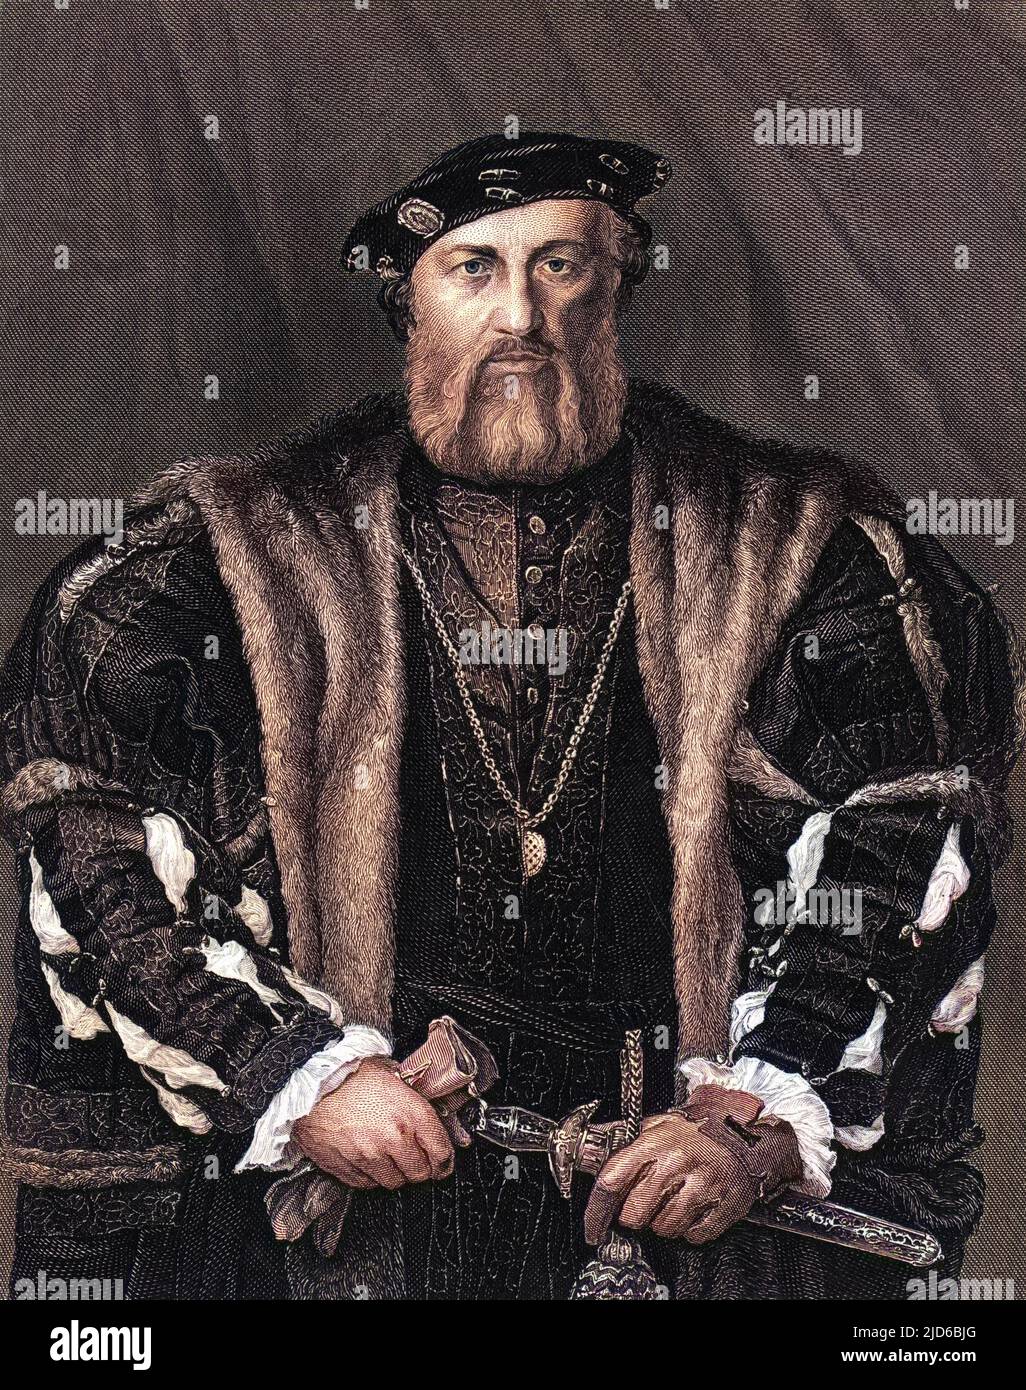 HUBERT MORET French goldsmith working in England at the court of Henry VIII. Colourised version of : 10166237       Date: CIRCA 1540 Stock Photo